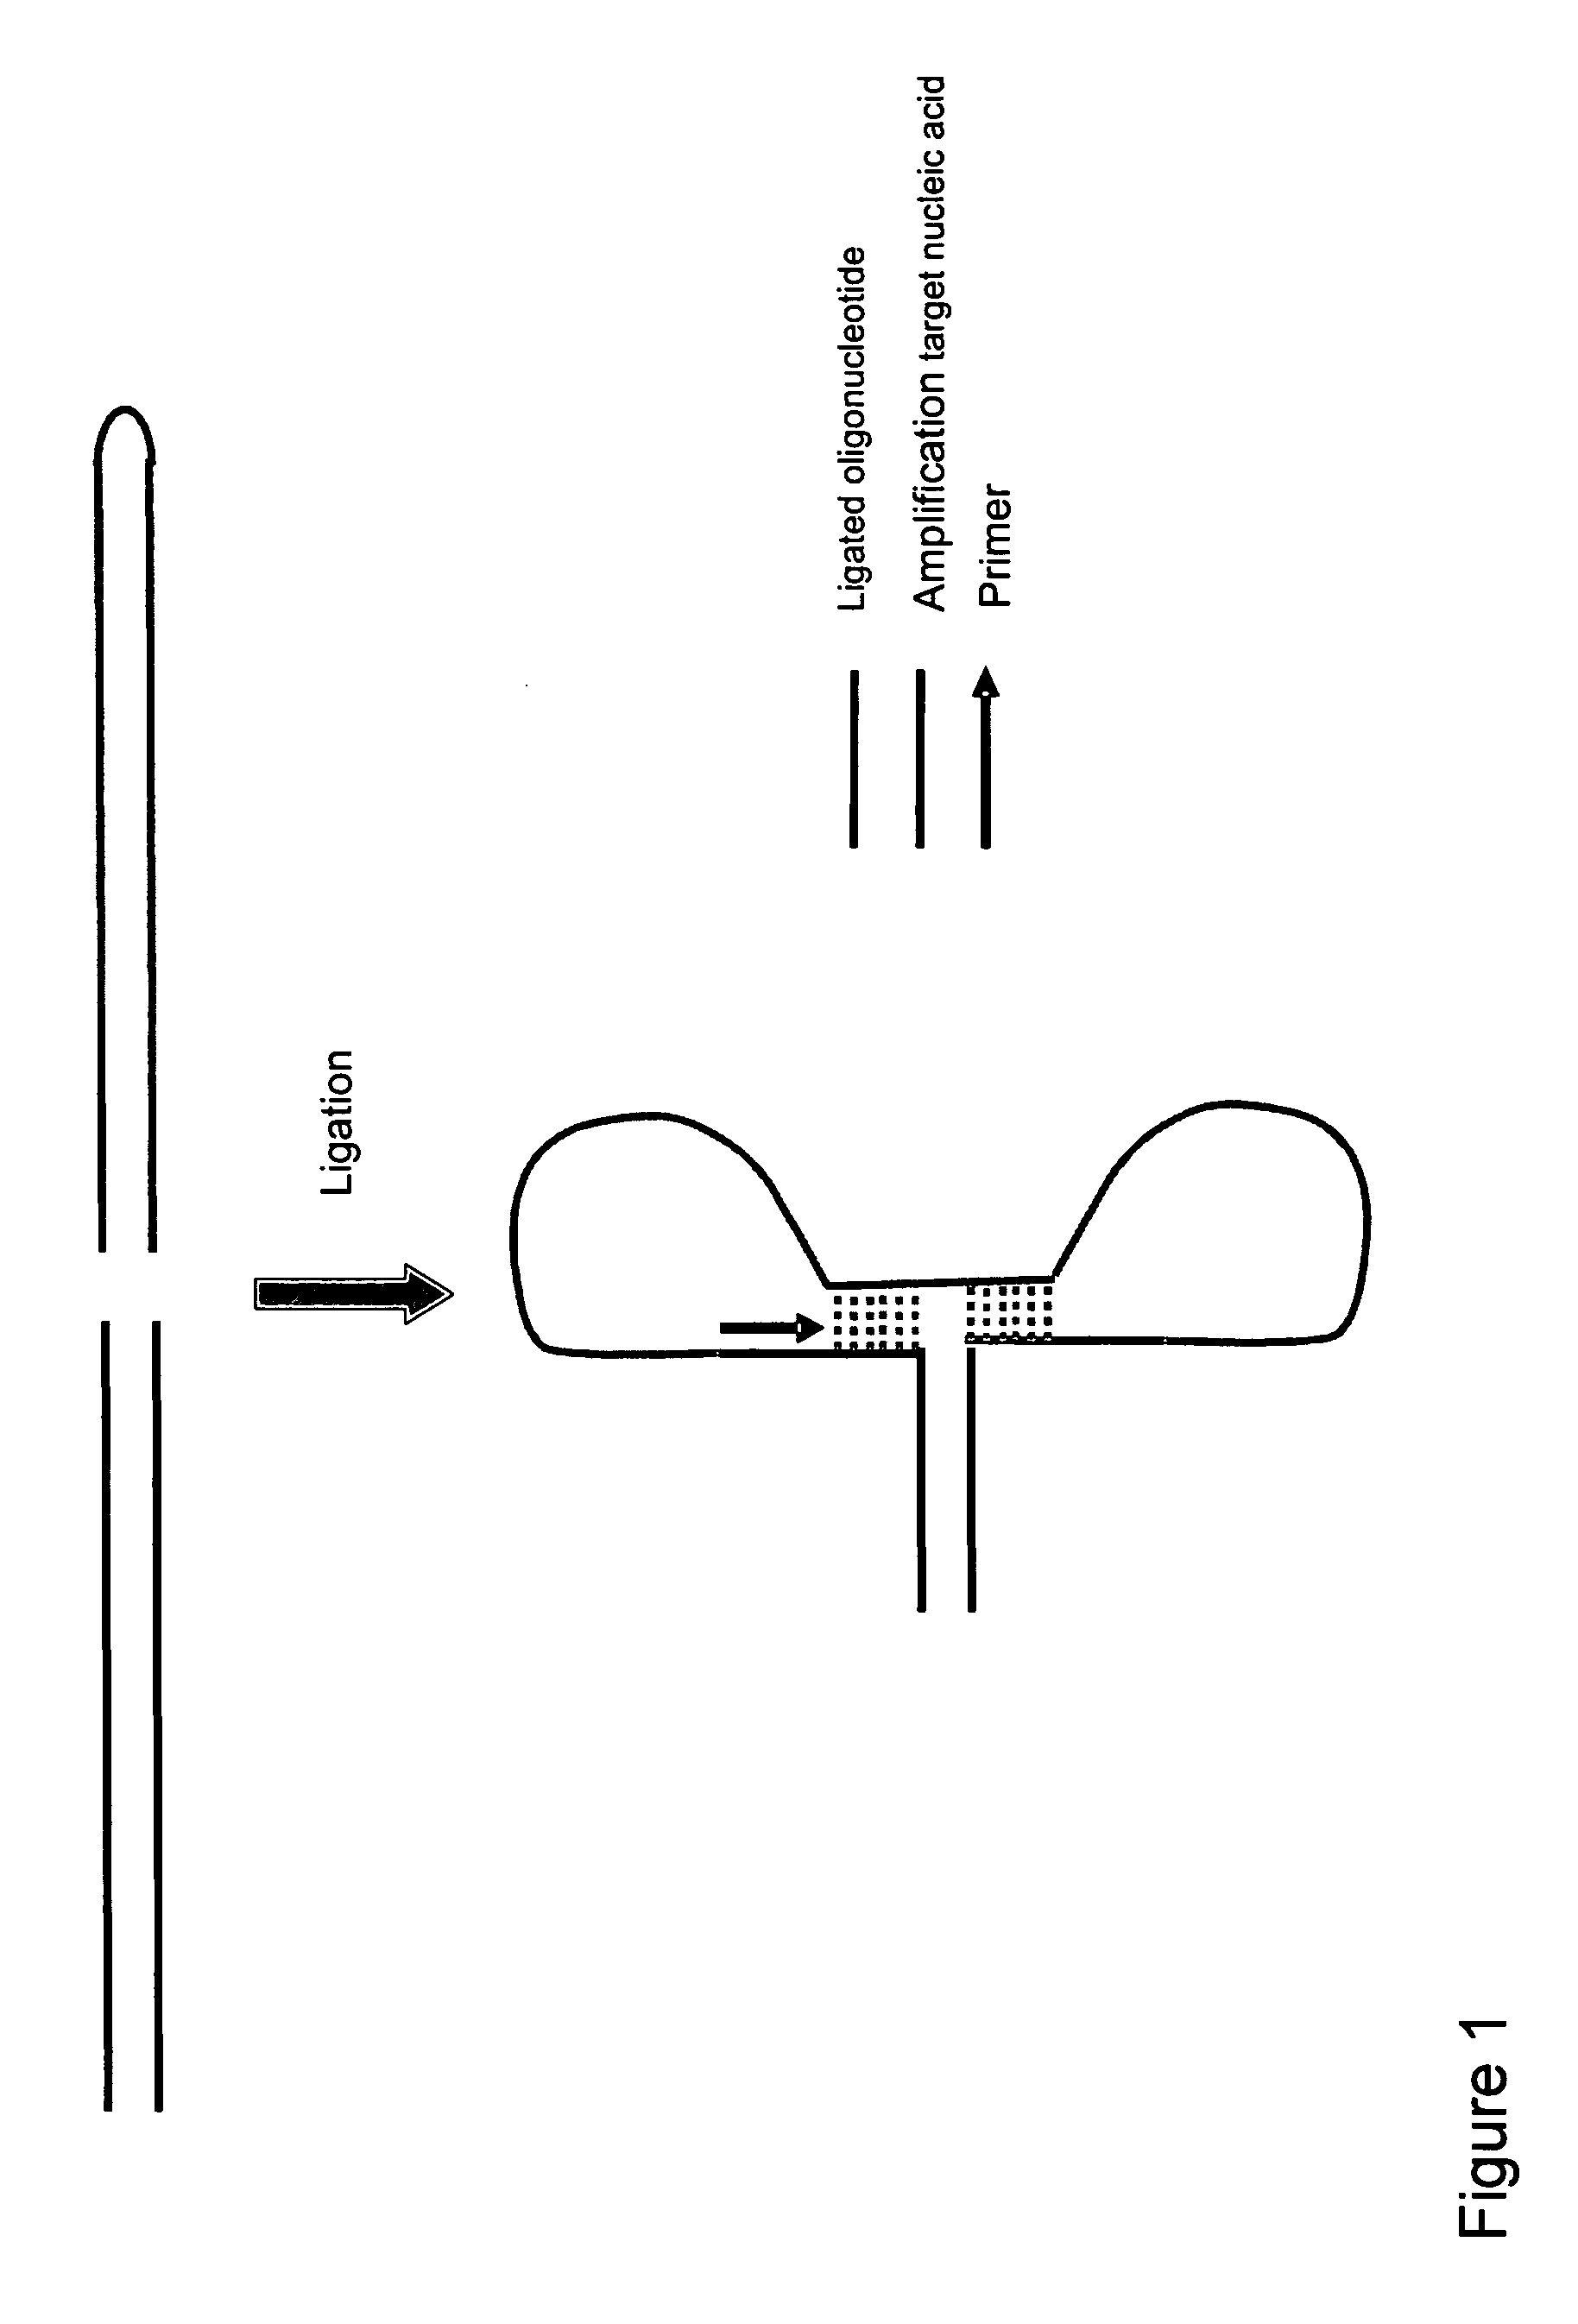 Method for amplifying nucleic acids